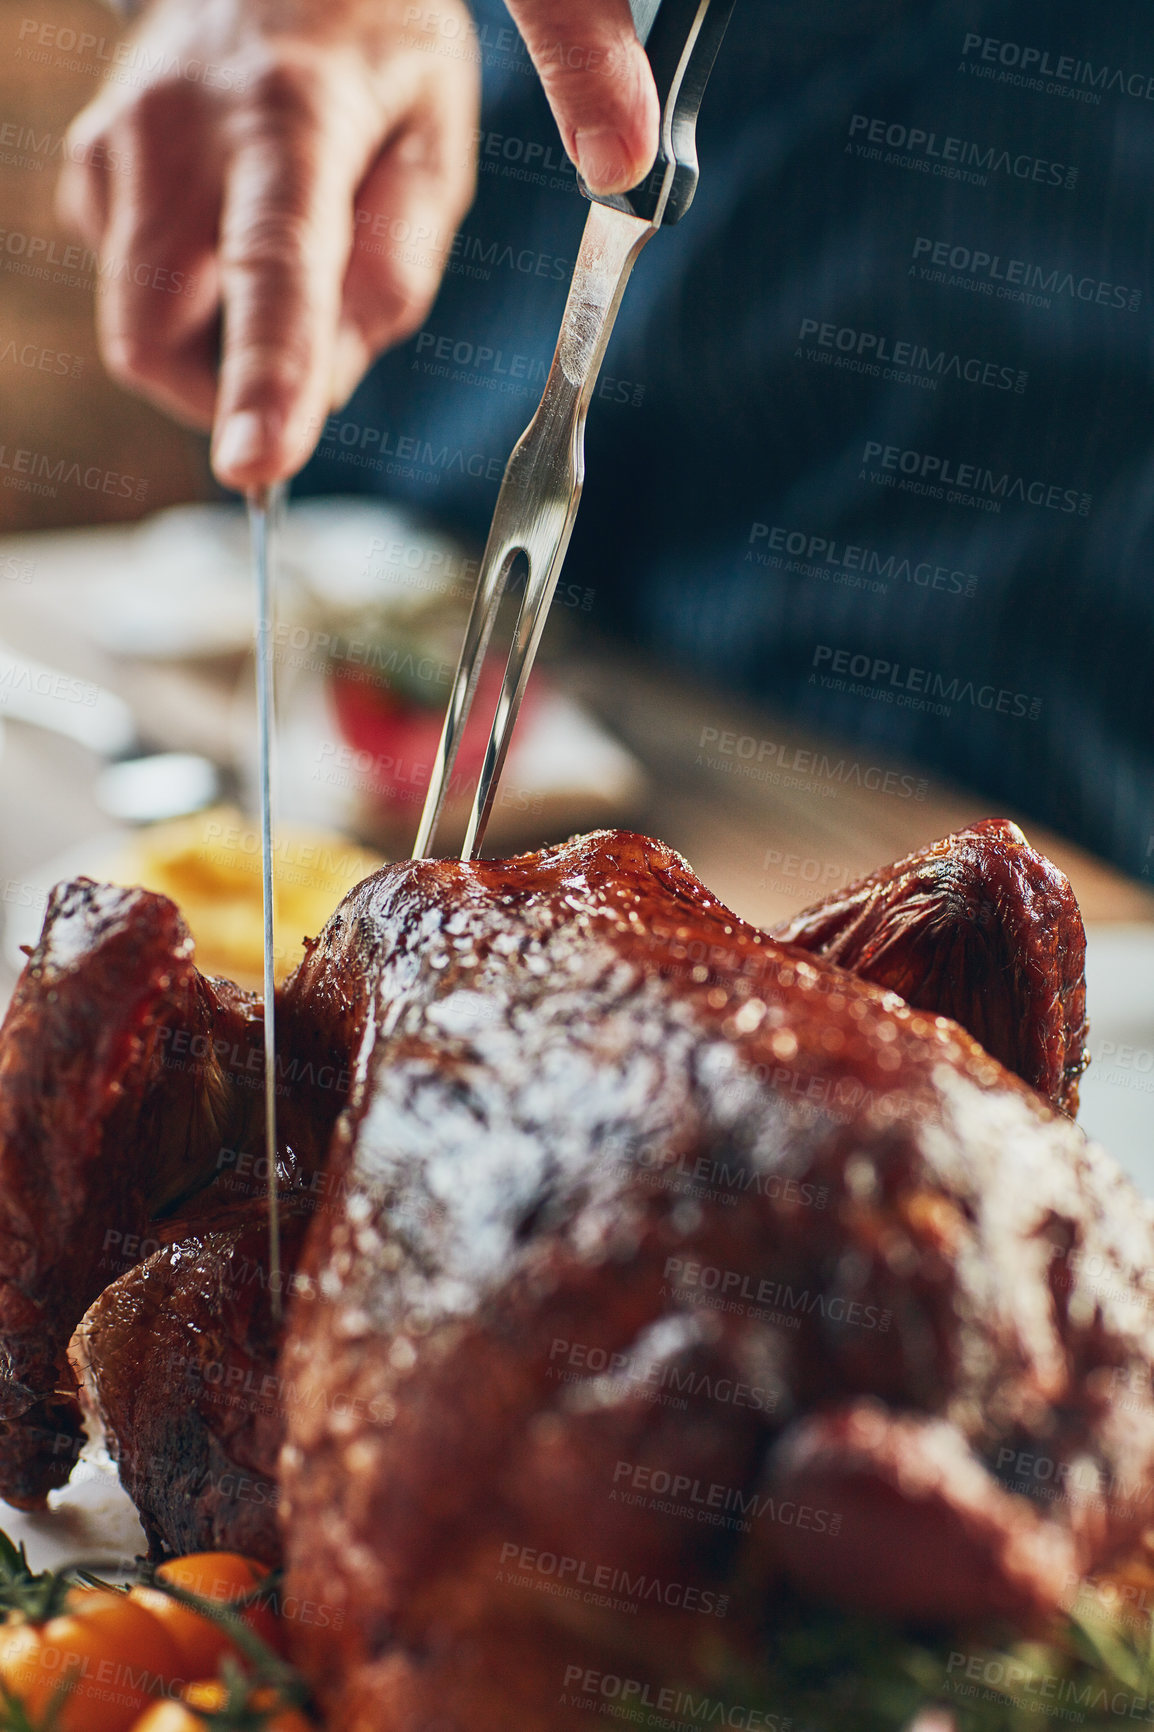 Buy stock photo Closeup shot of a person cutting into a roasted turkey